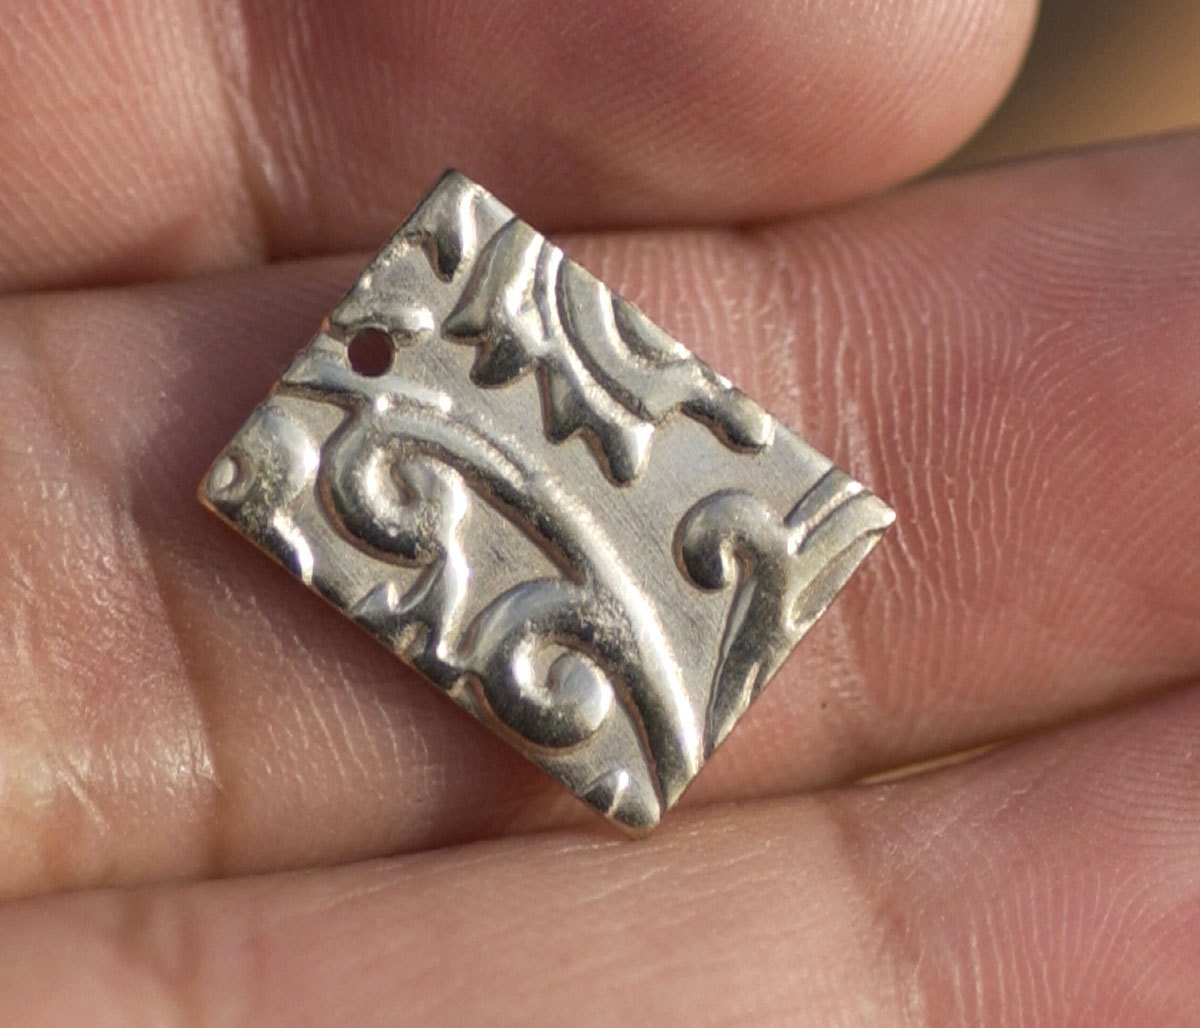 Nickel Silver Rectangle 11mm x 15mm Lotus Flowers Textured Cutout Shape Charms for Metalworking Stamping Texturing Blanks - 6 pieces